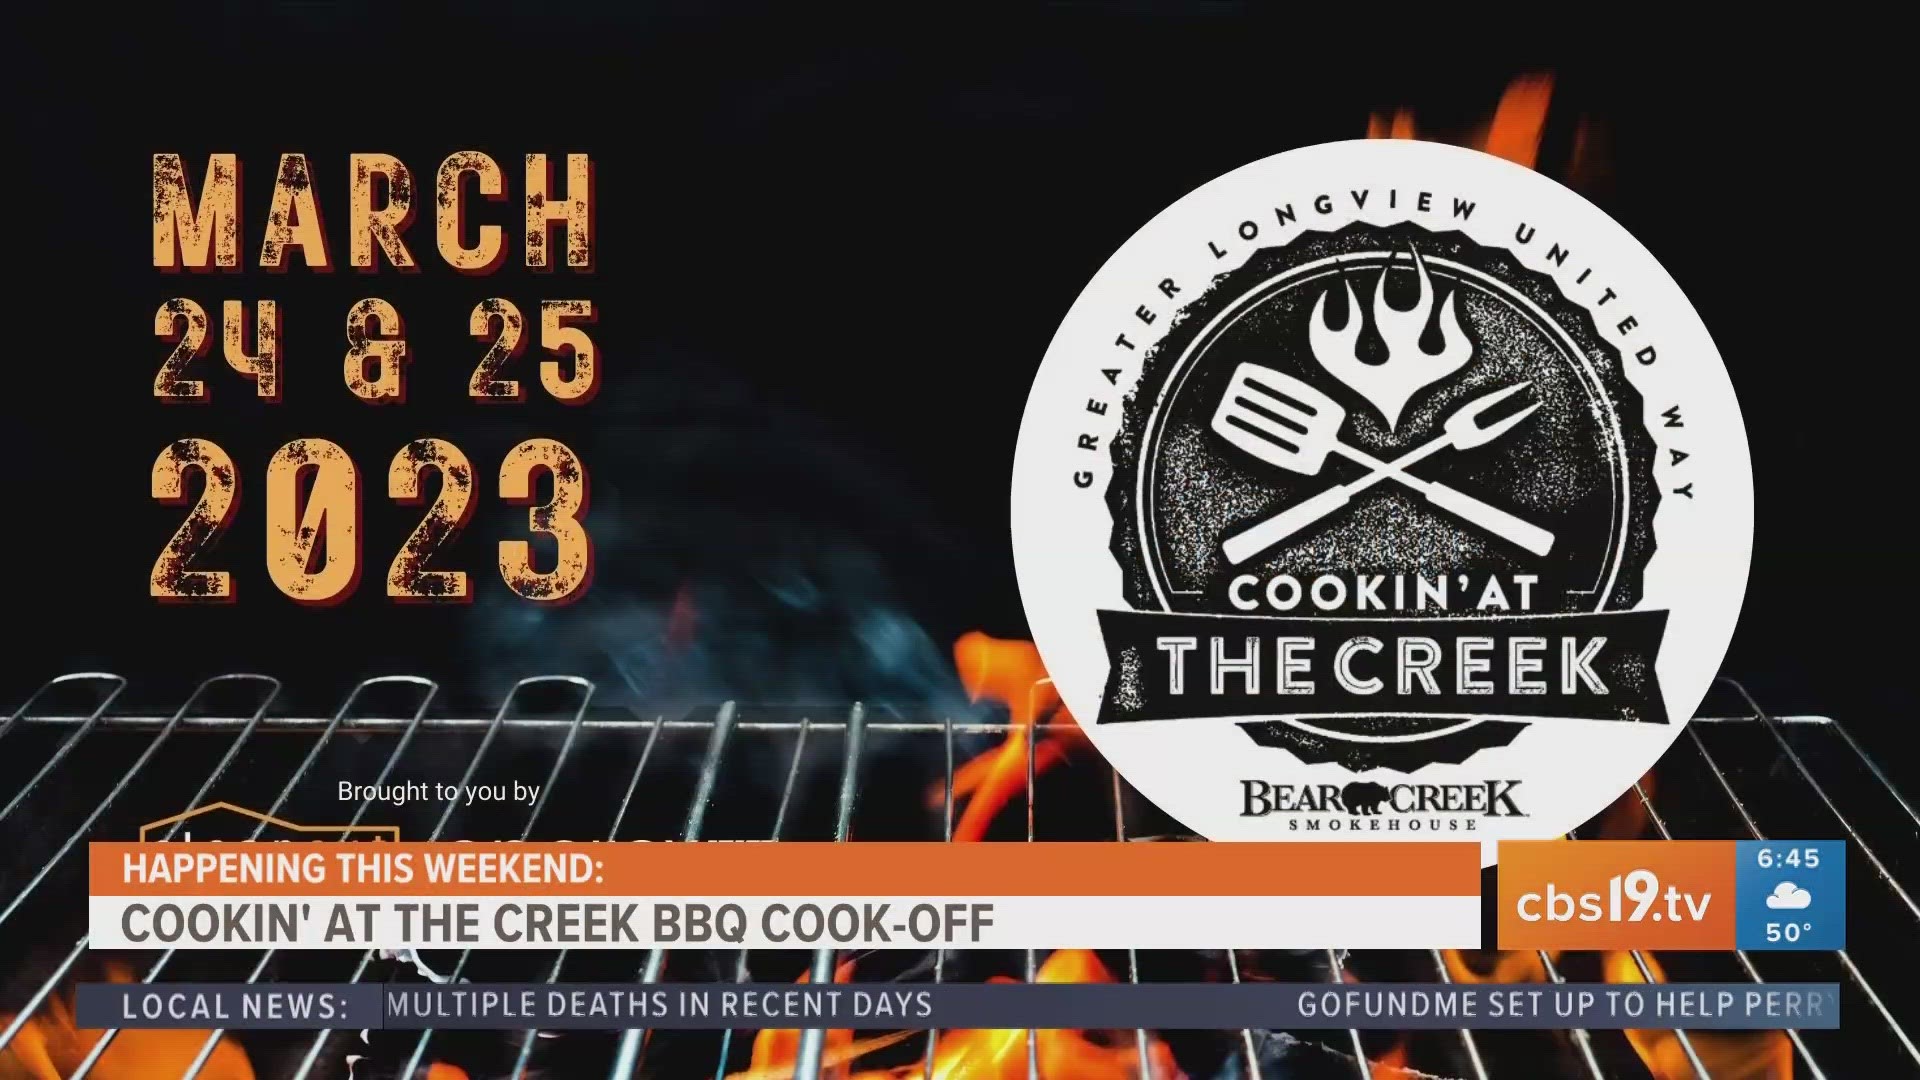 Greater Longview United Way to host BBQ cook-off fundraiser this weekend at Bear Creek Smokehouse